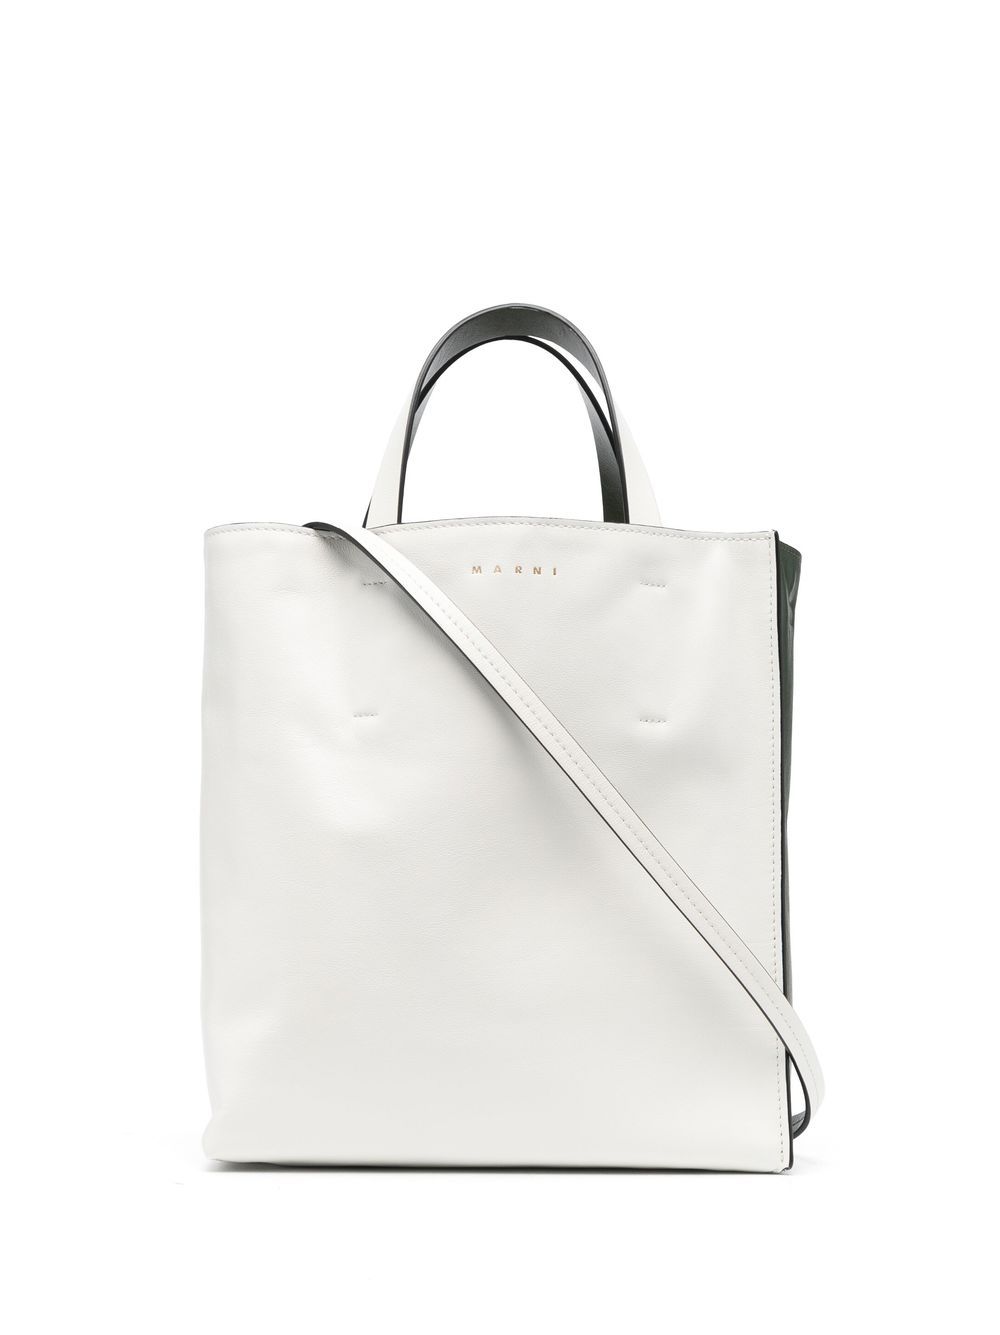 Image 1 of Marni small Museo leather tote bag